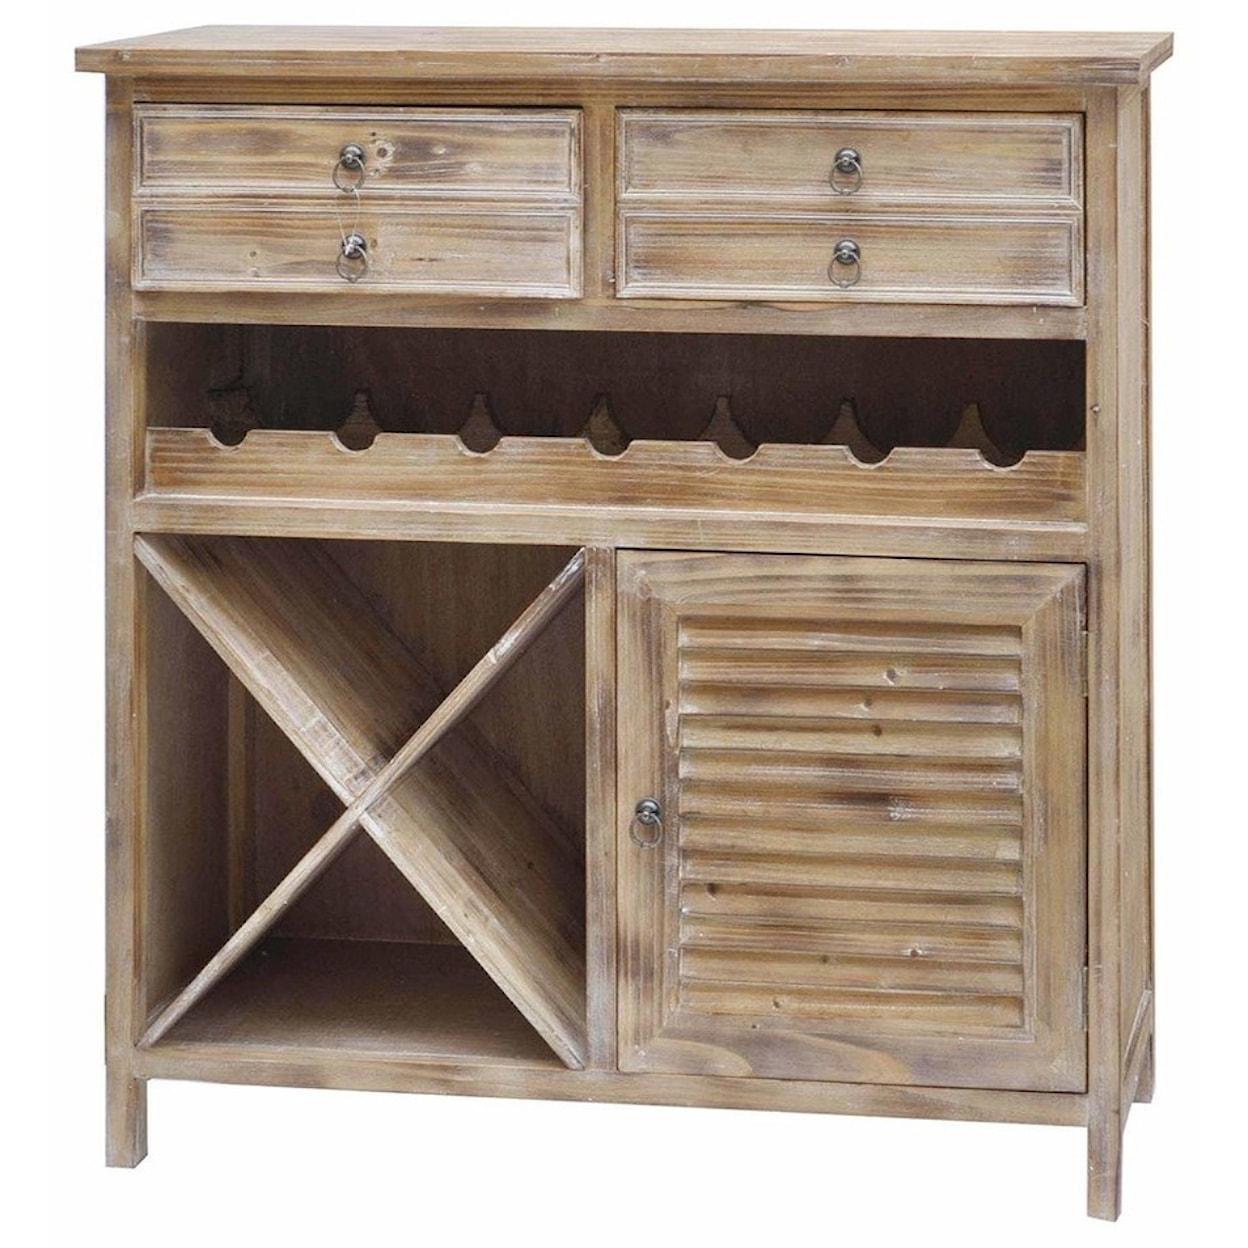 Crestview Collection Accent Furniture Jackson 2 Drawer Weathered Oak Wine Cabinet